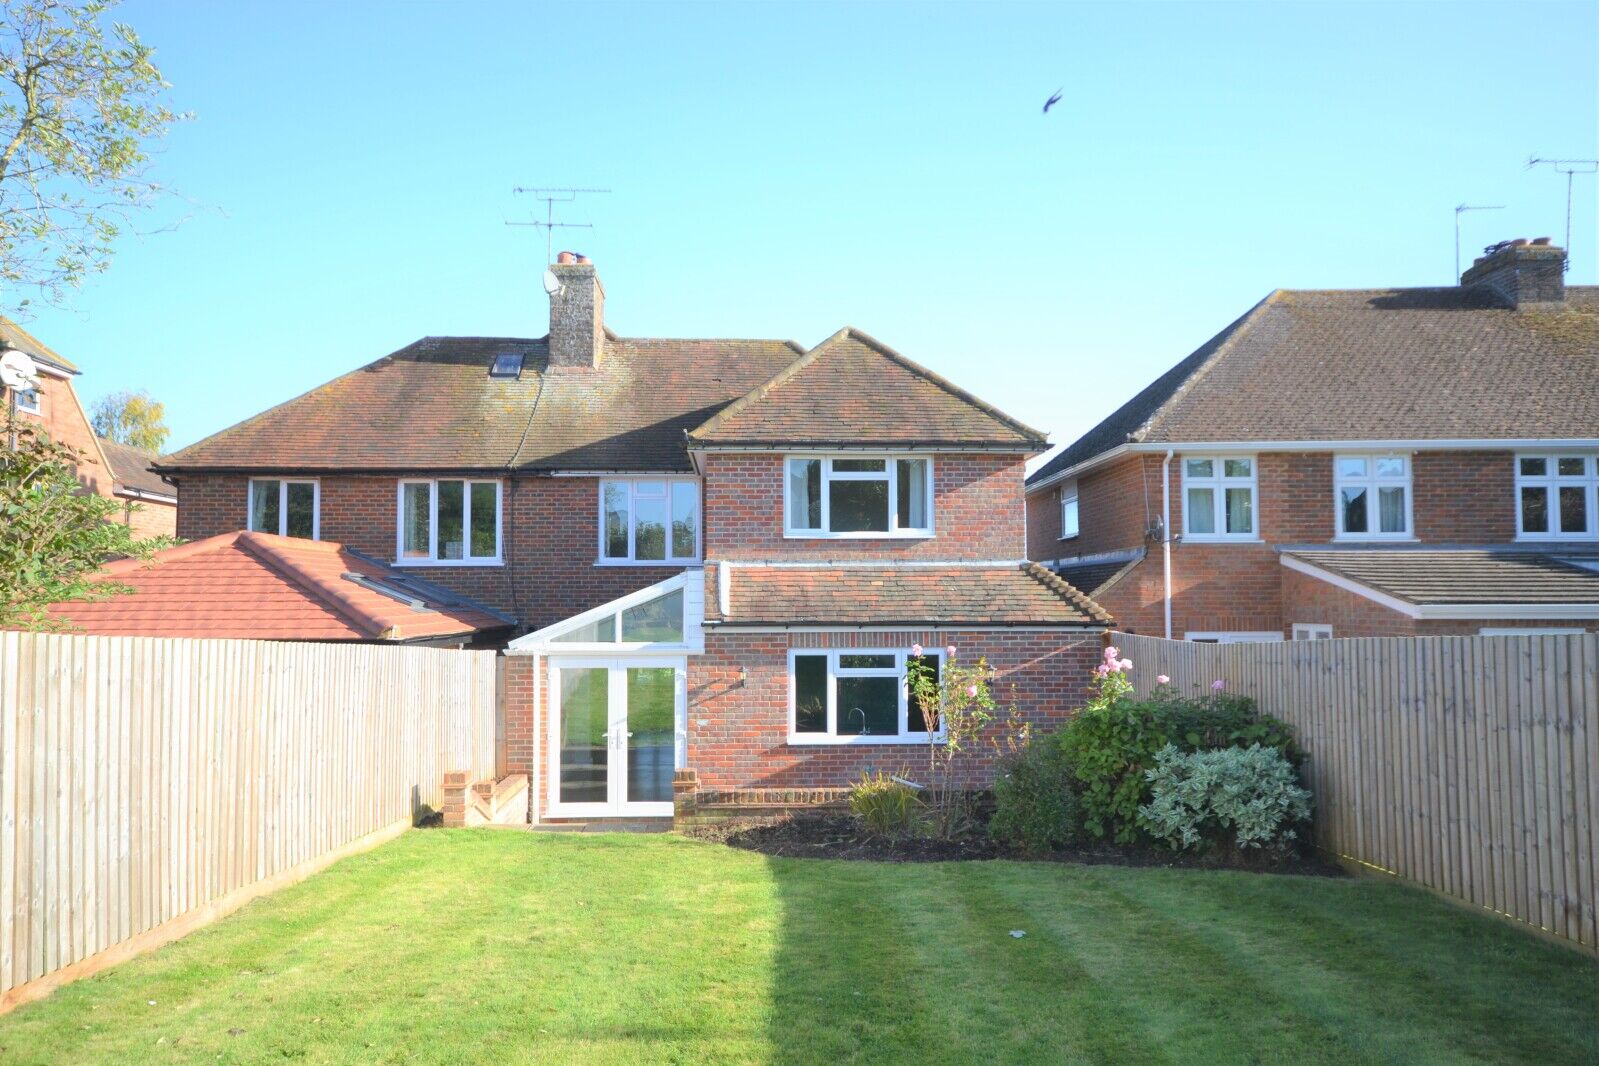 4 bedroom semi detached house to rent, Available from 06/07/2024 Chartridge Lane, Chesham, HP5, main image